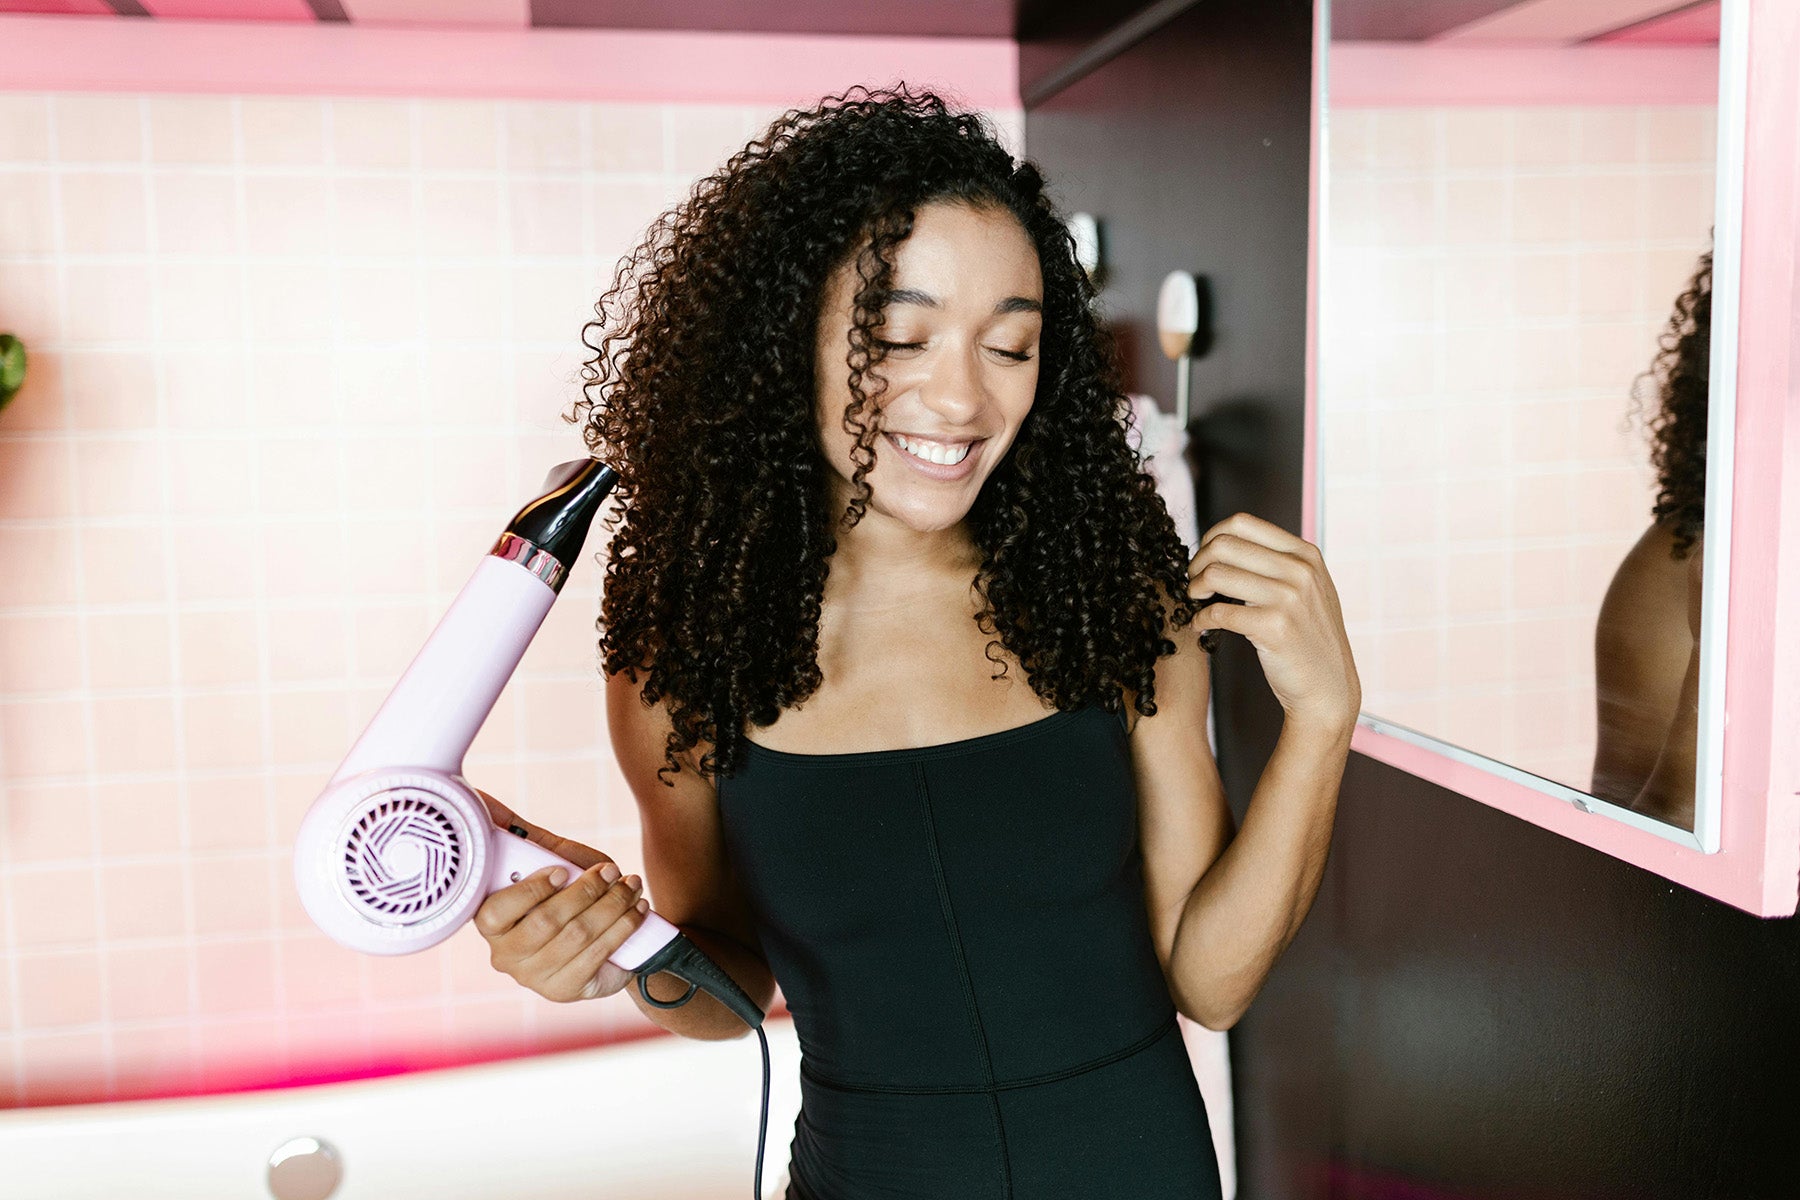 Picture of a hairdryer being held against a pink background